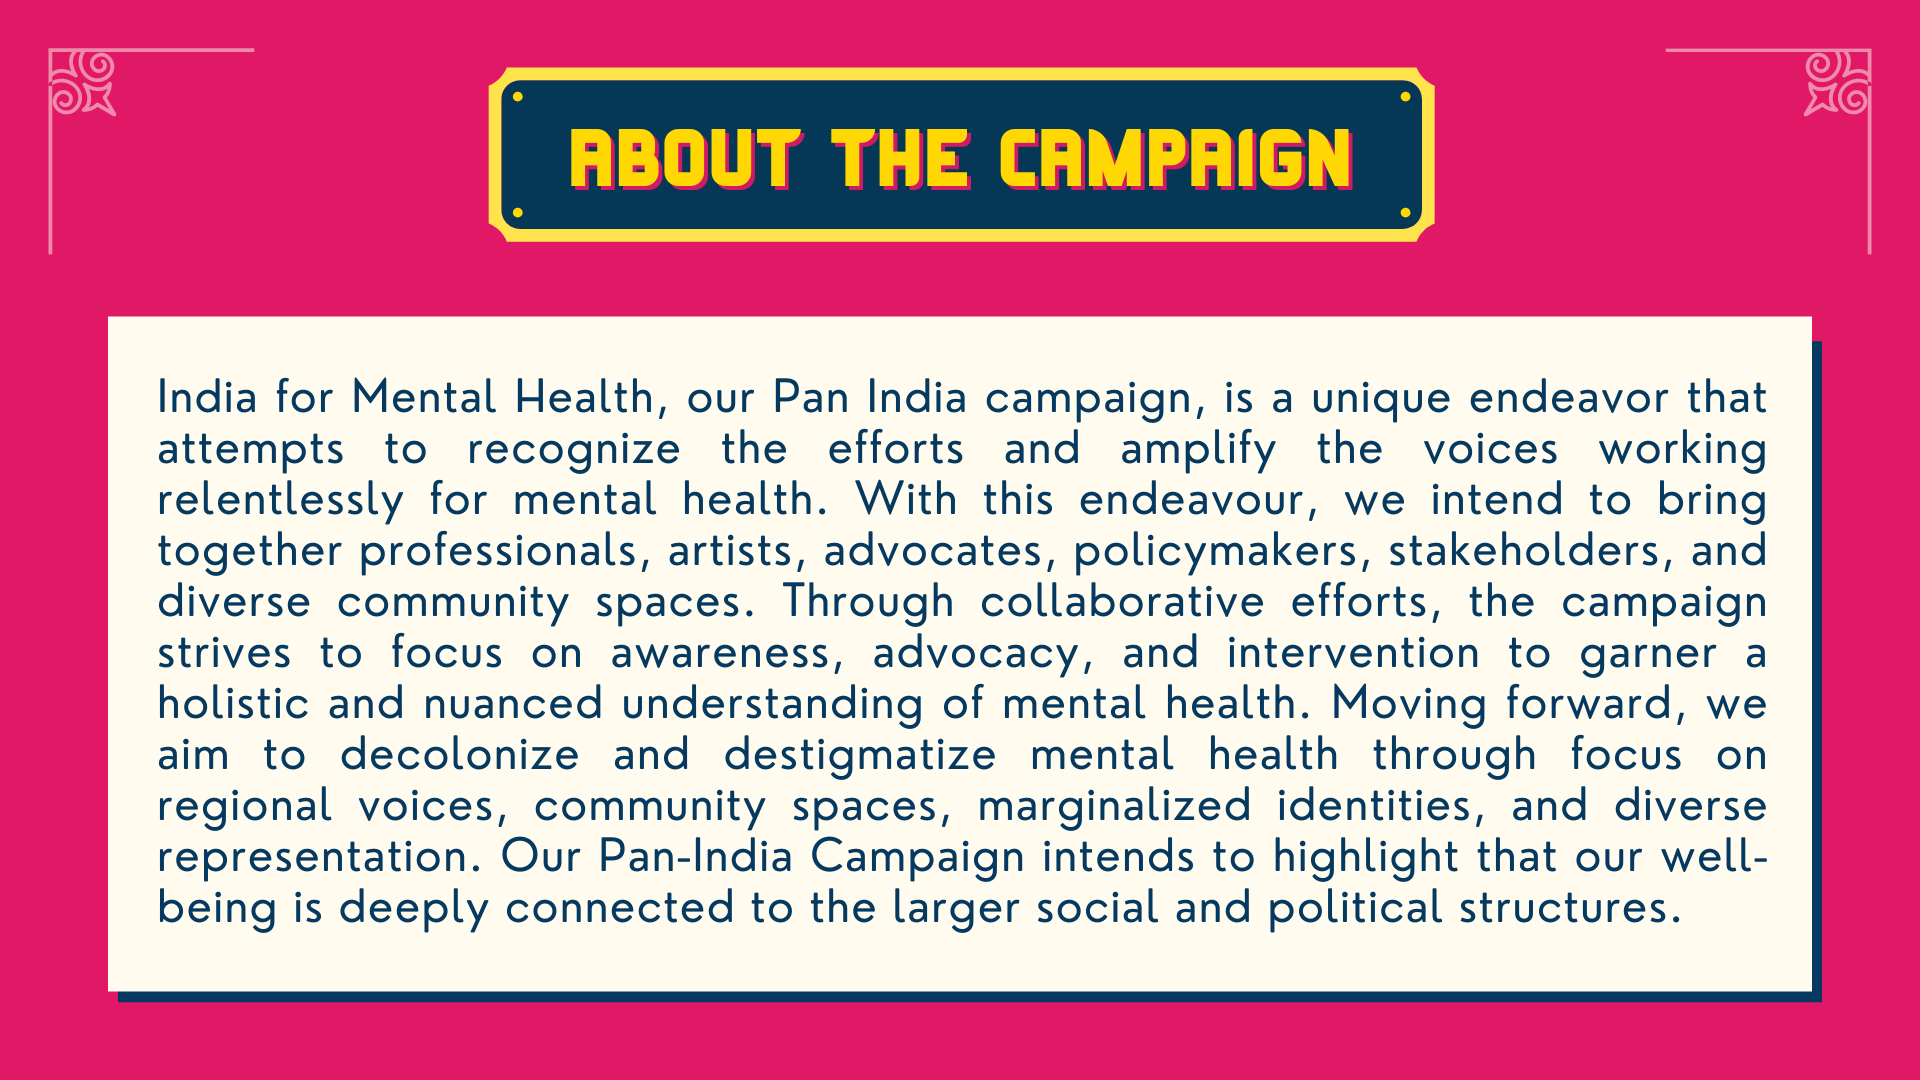 India for Mental Health, our Pan India campaign, is a unique endeavor that attempts to recognize the efforts and amplify the voices working relentlessly for mental health. With this endeavour, we intend to bring together professionals, artists, advocates, policymakers, stakeholders, and diverse community spaces. Through collaborative efforts, the campaign strives to focus on awareness, advocacy, and intervention to garner a holistic and nuanced understanding of mental health. Moving forward, we aim to decolonize and destigmatize mental health through focus on regional voices, community spaces, marginalized identities, and diverse representation. Our Pan-India Campaign intends to highlight that our well-being is deeply connected to the larger social and political structures.